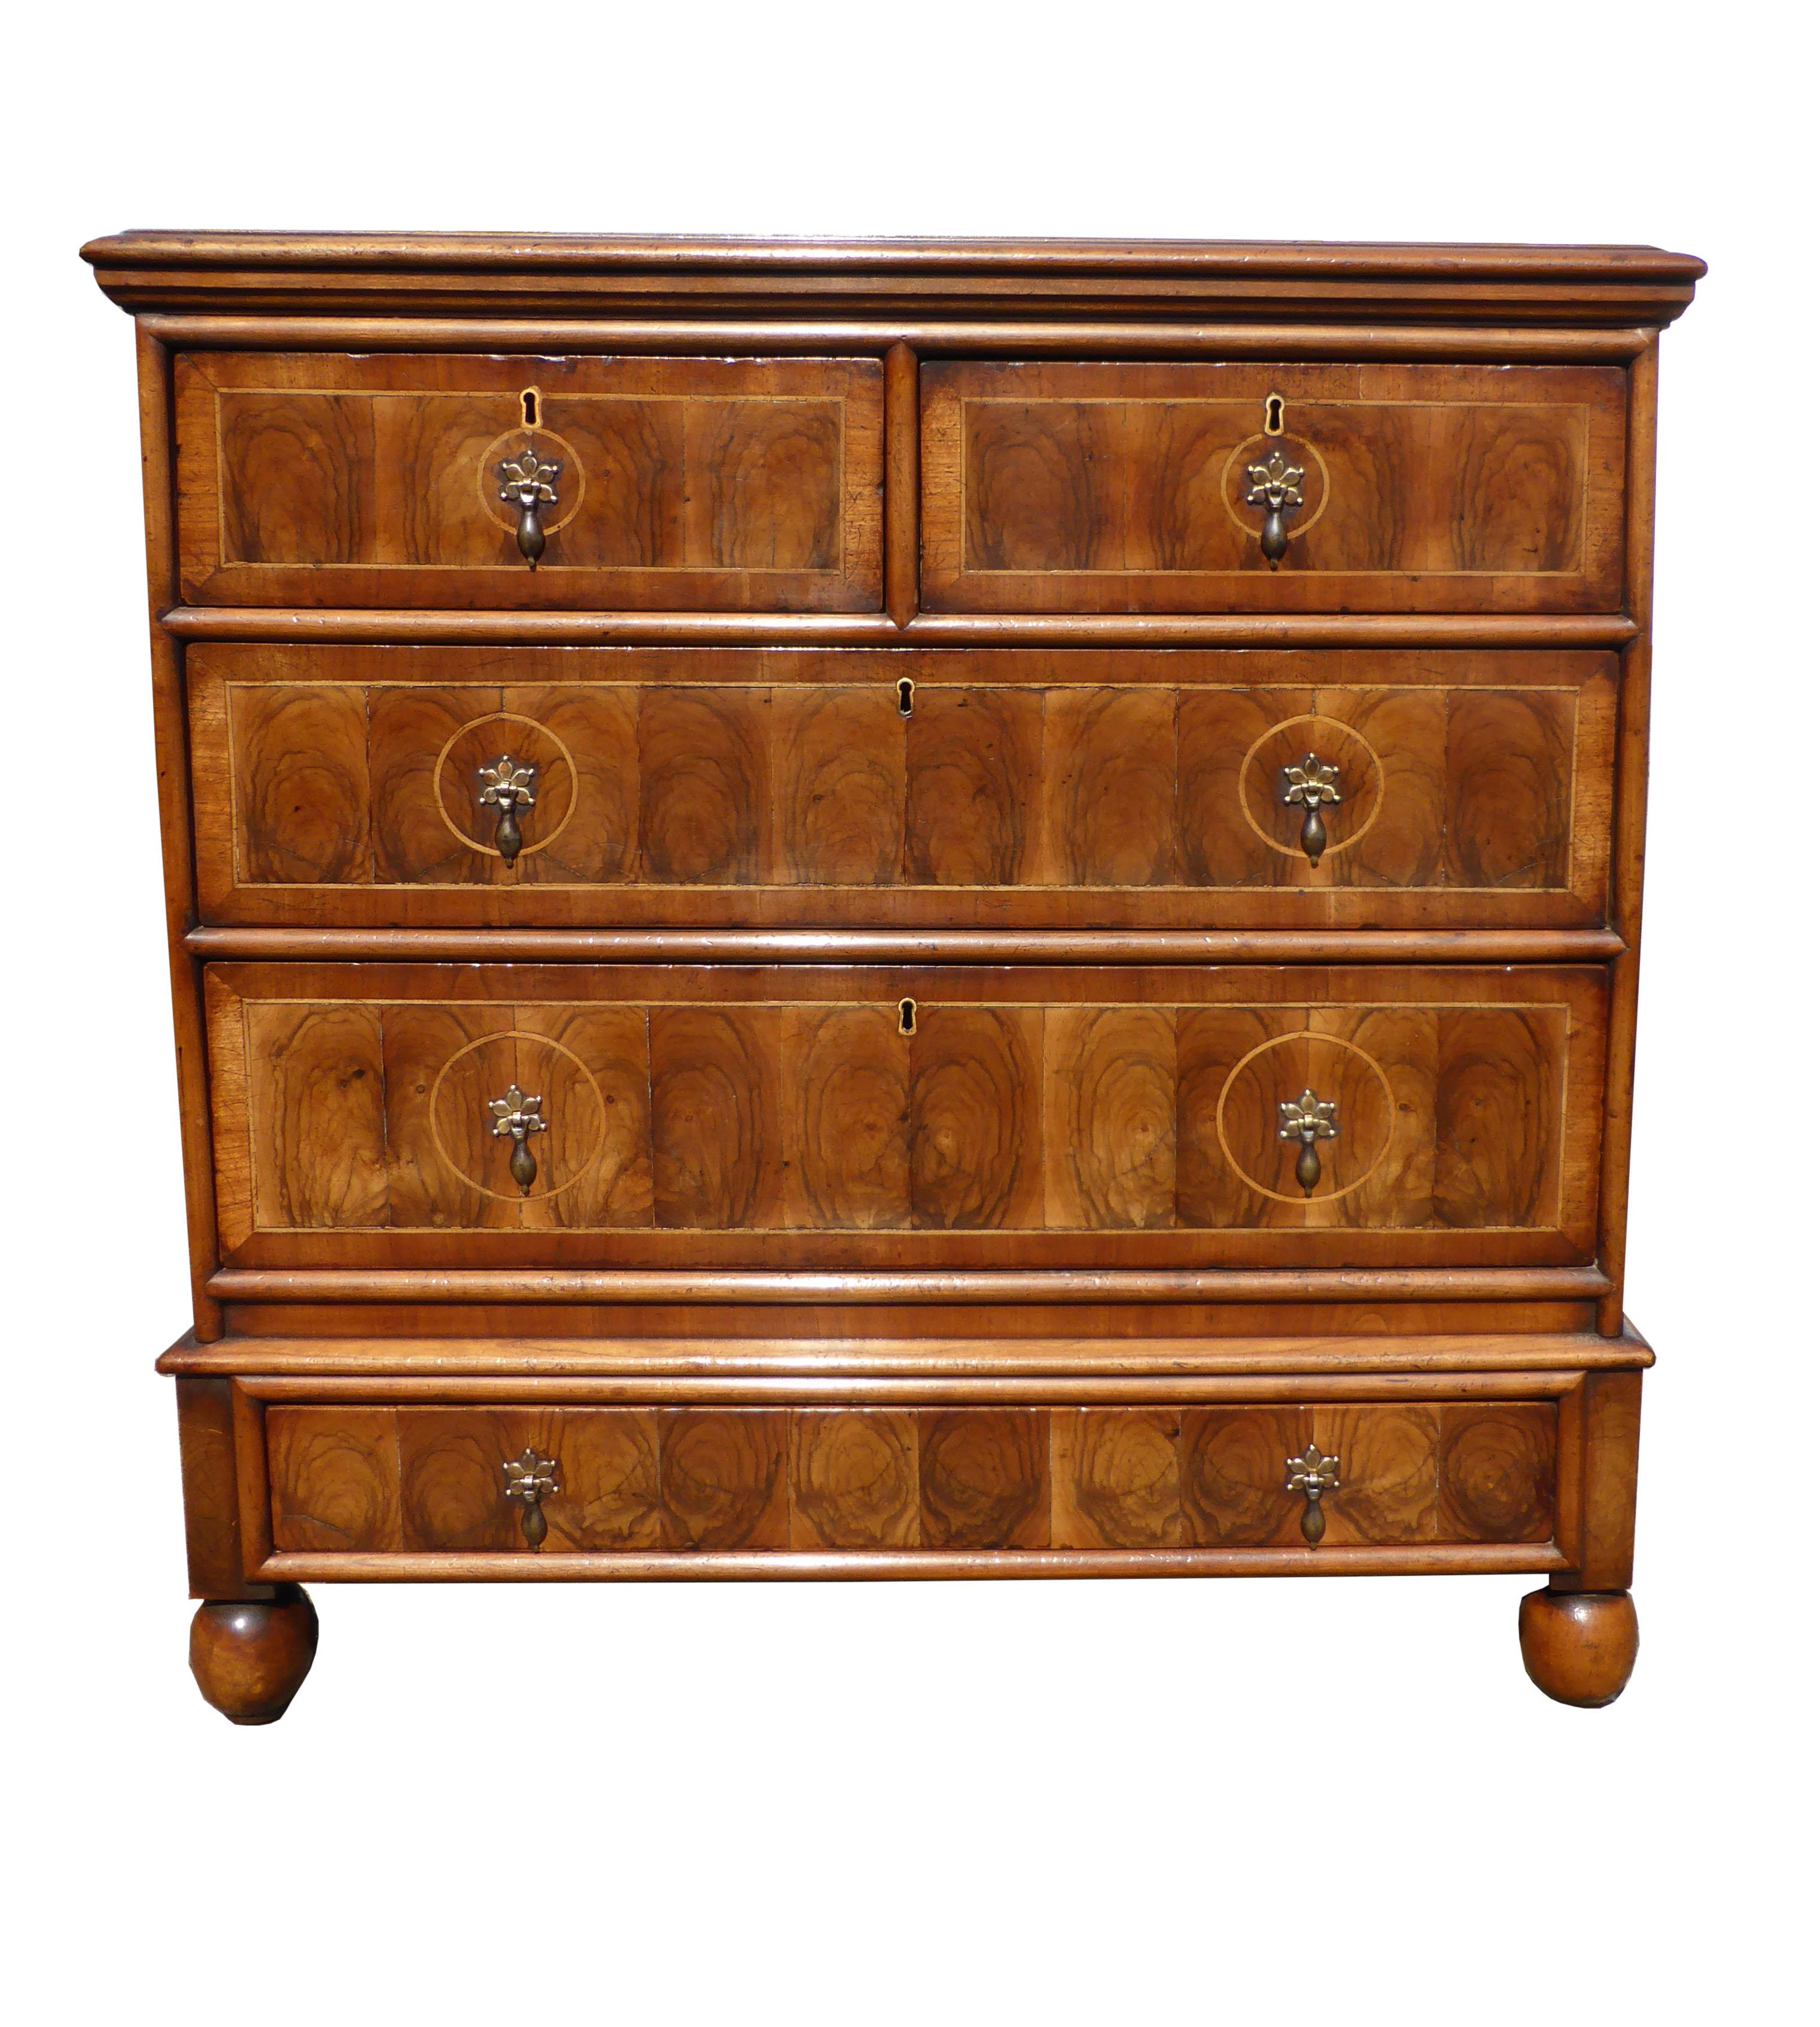 For sale is a Queen Anne style oyster shell veneered chest of drawers. The top of the chest has beautiful oyster shell veneer with circle white line inlays, below this are five-drawers, two short and three long. Each drawer has nice drop handles